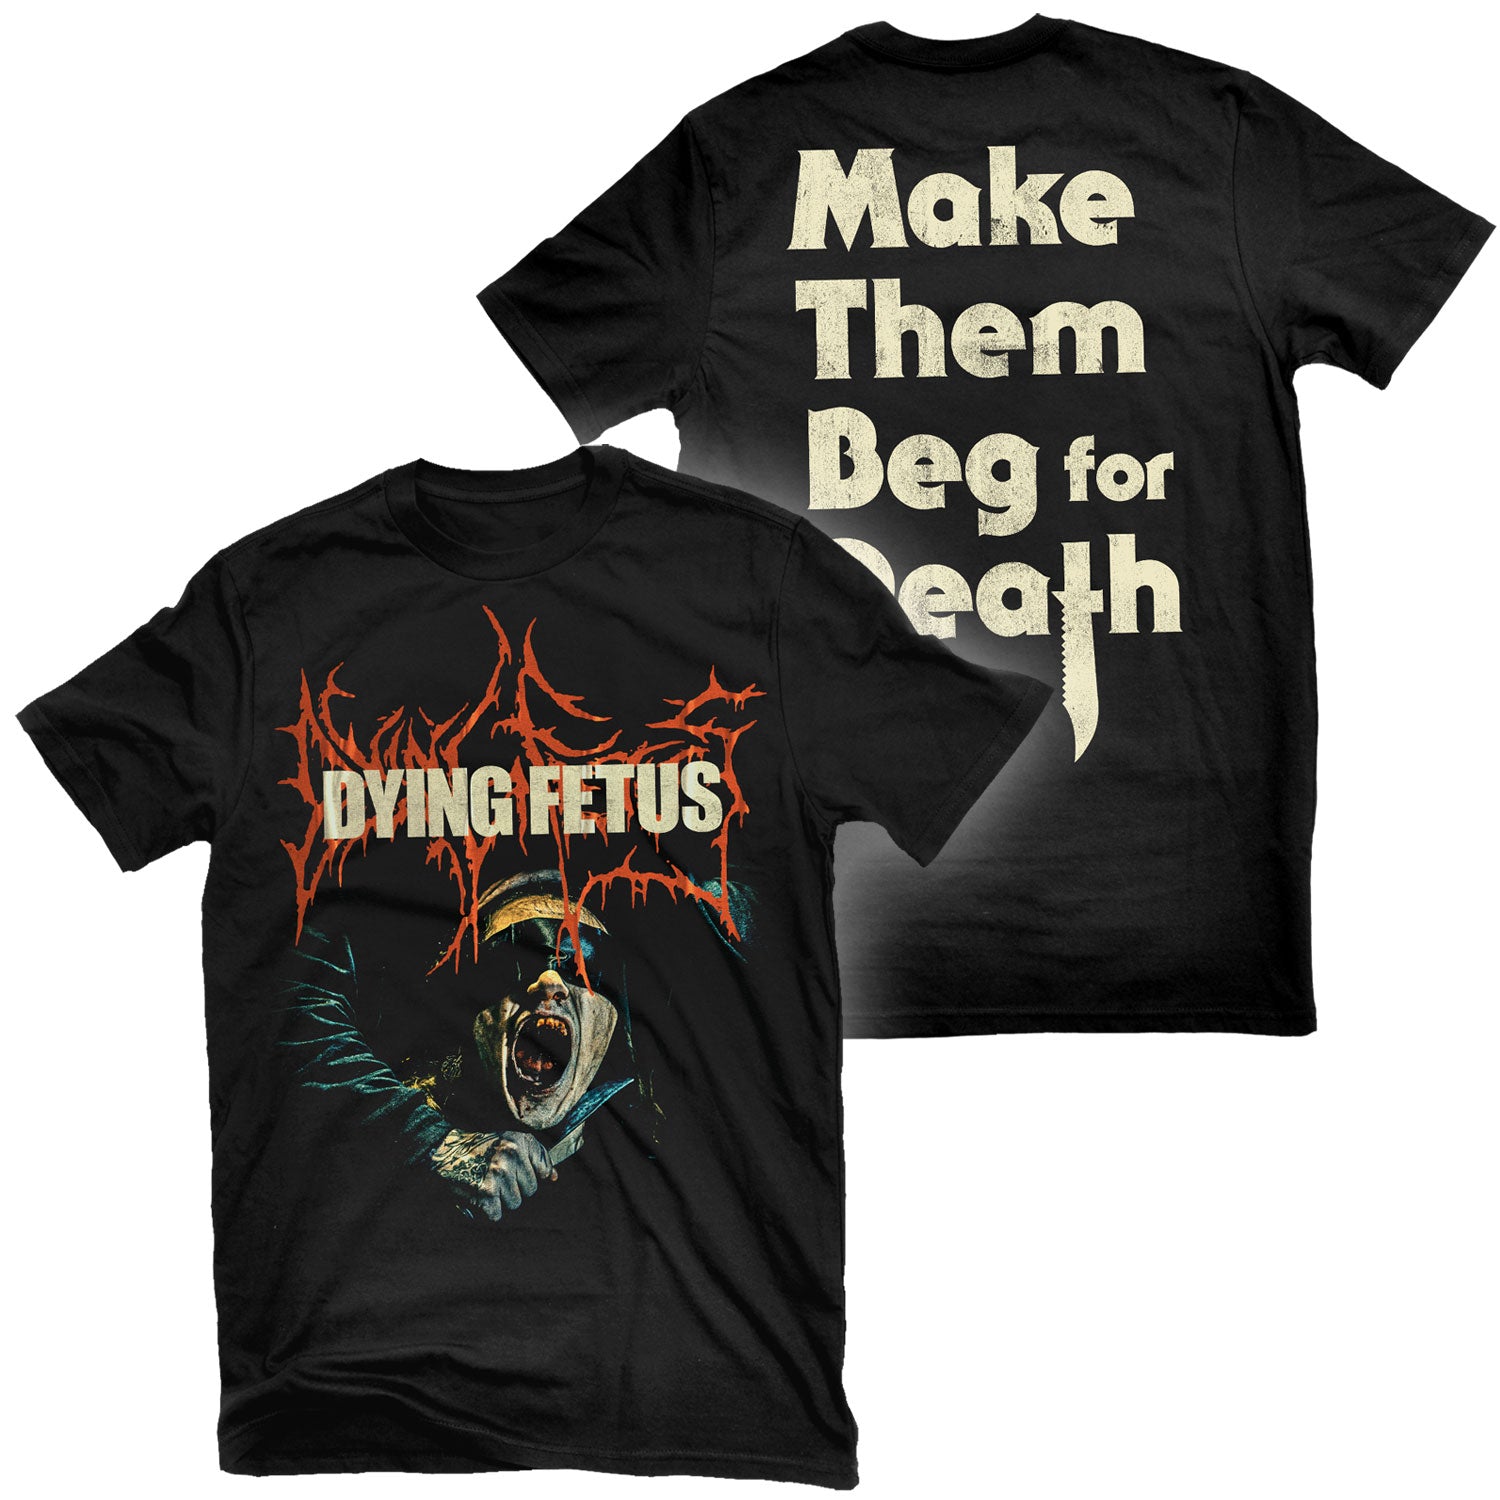 Dying Fetus "Make Them Beg For Death" T-Shirt